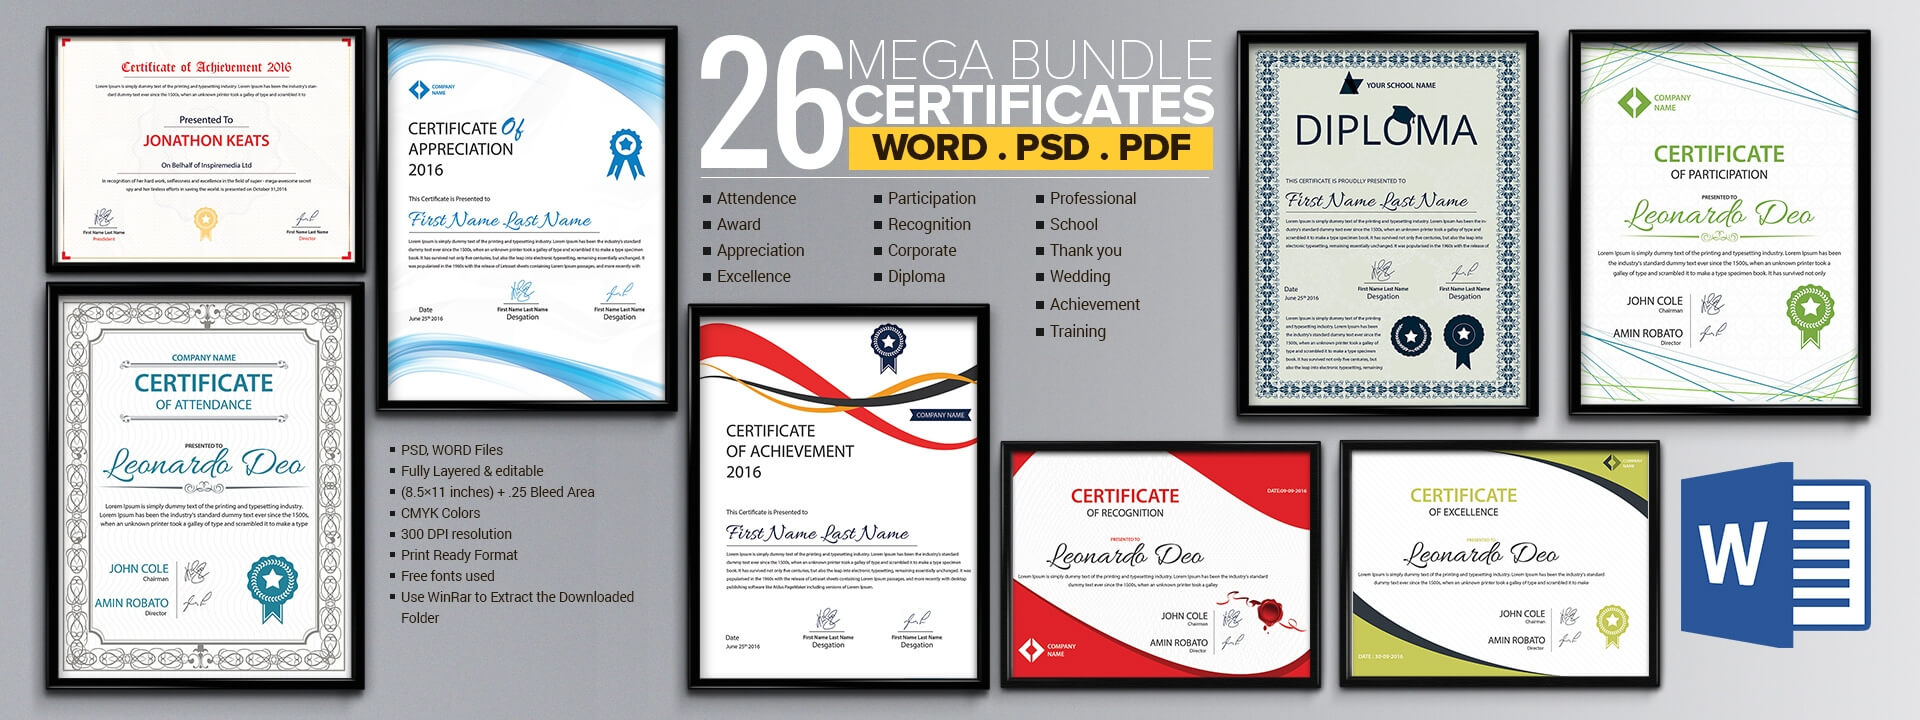 Word Certificate Template – 53+ Free Download Samples Throughout Free Certificate Templates For Word 2007